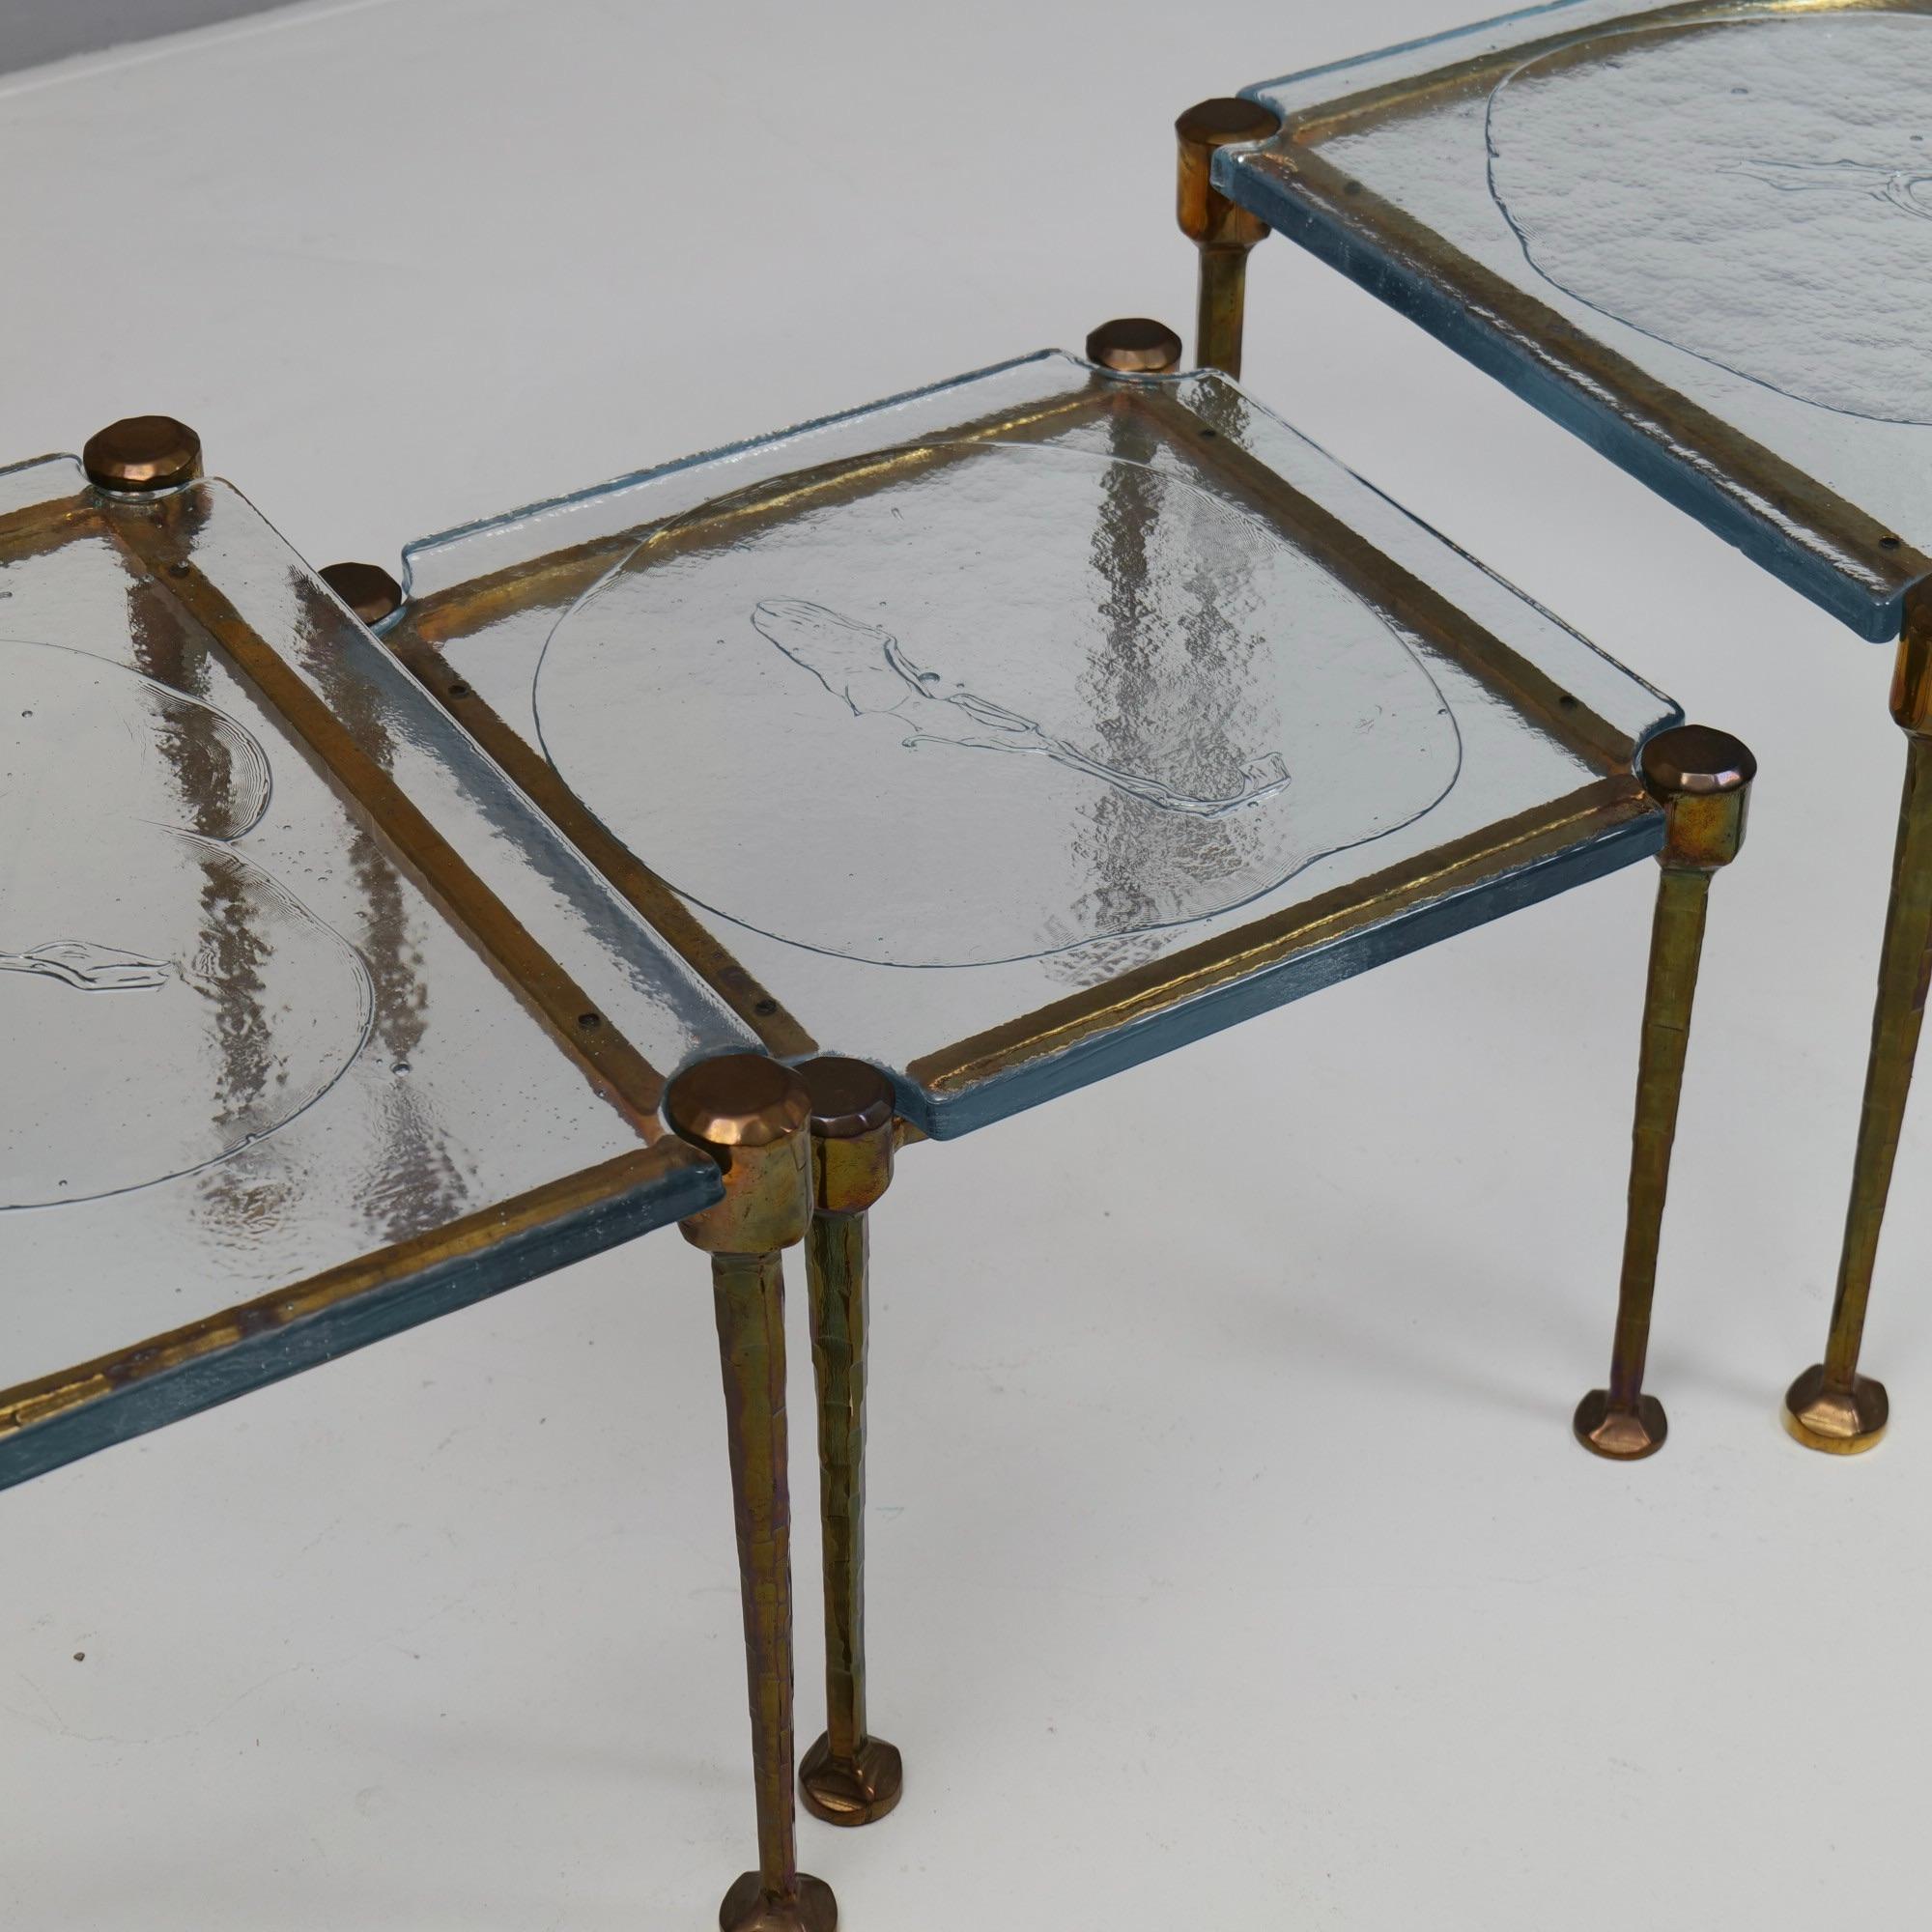 forged bronze tables with blue cast glass - 1980s brutalist 1